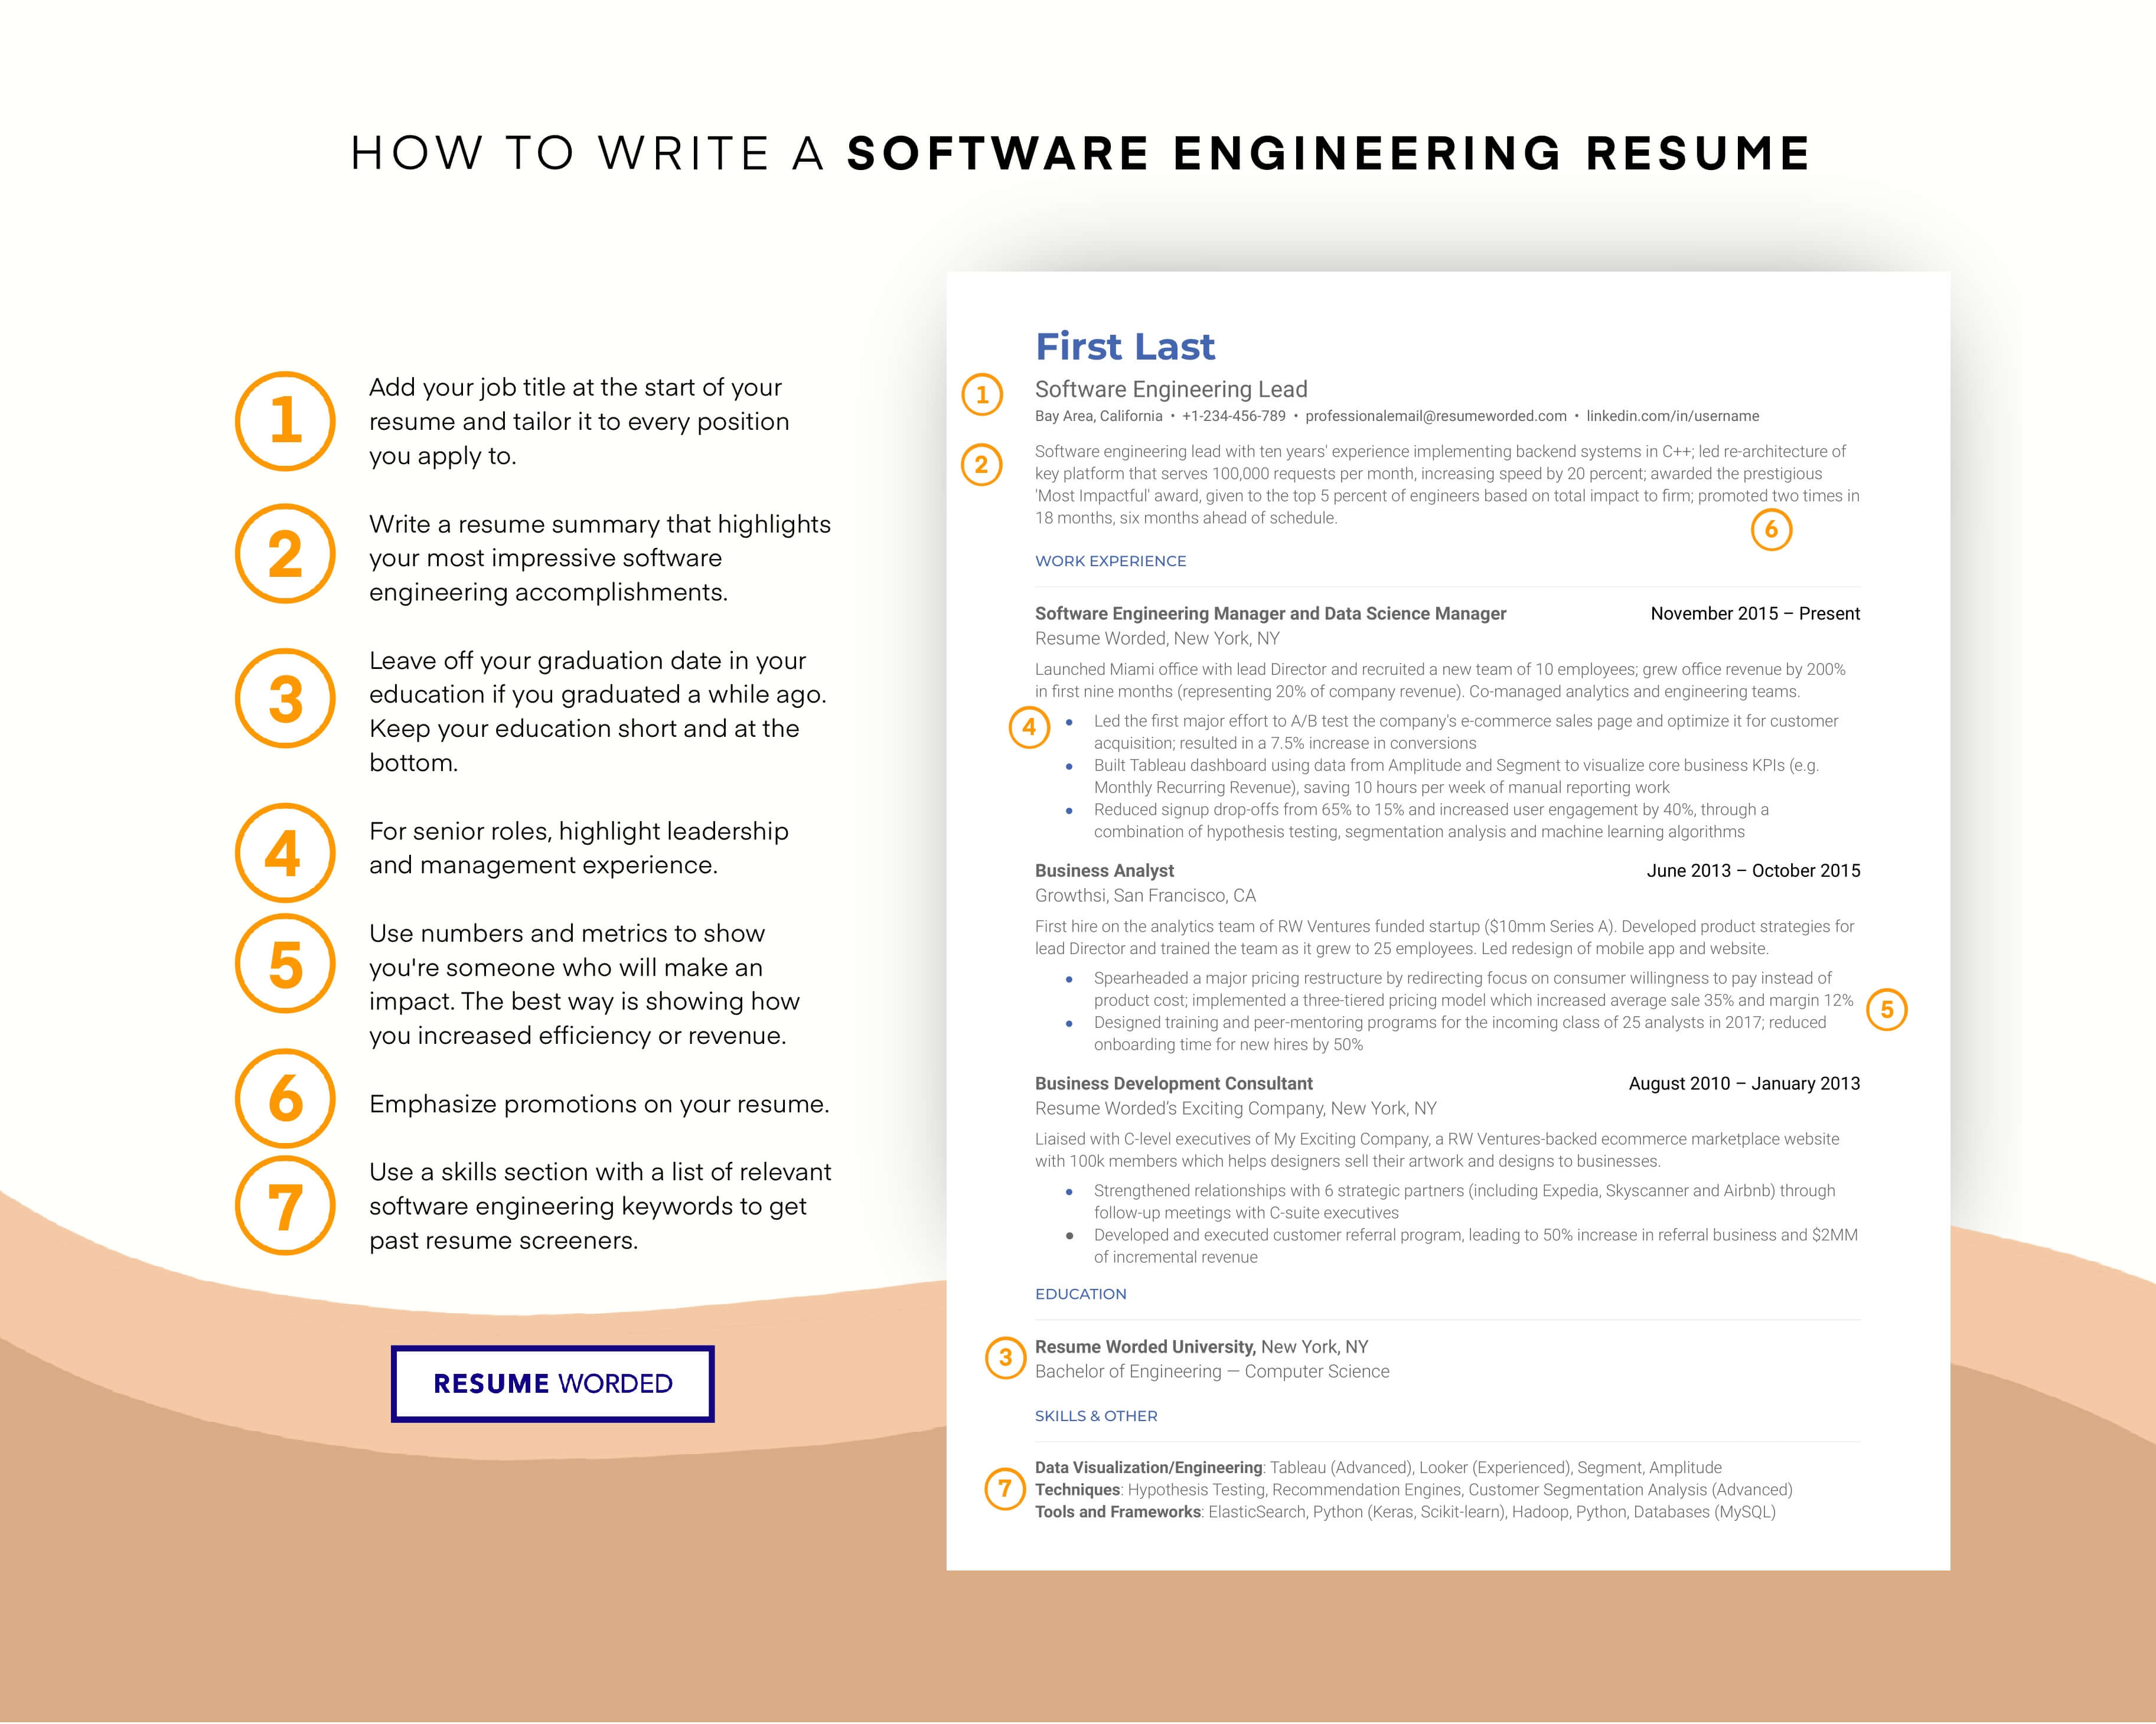 Demonstrate your software proficiency - Structural Engineer CV